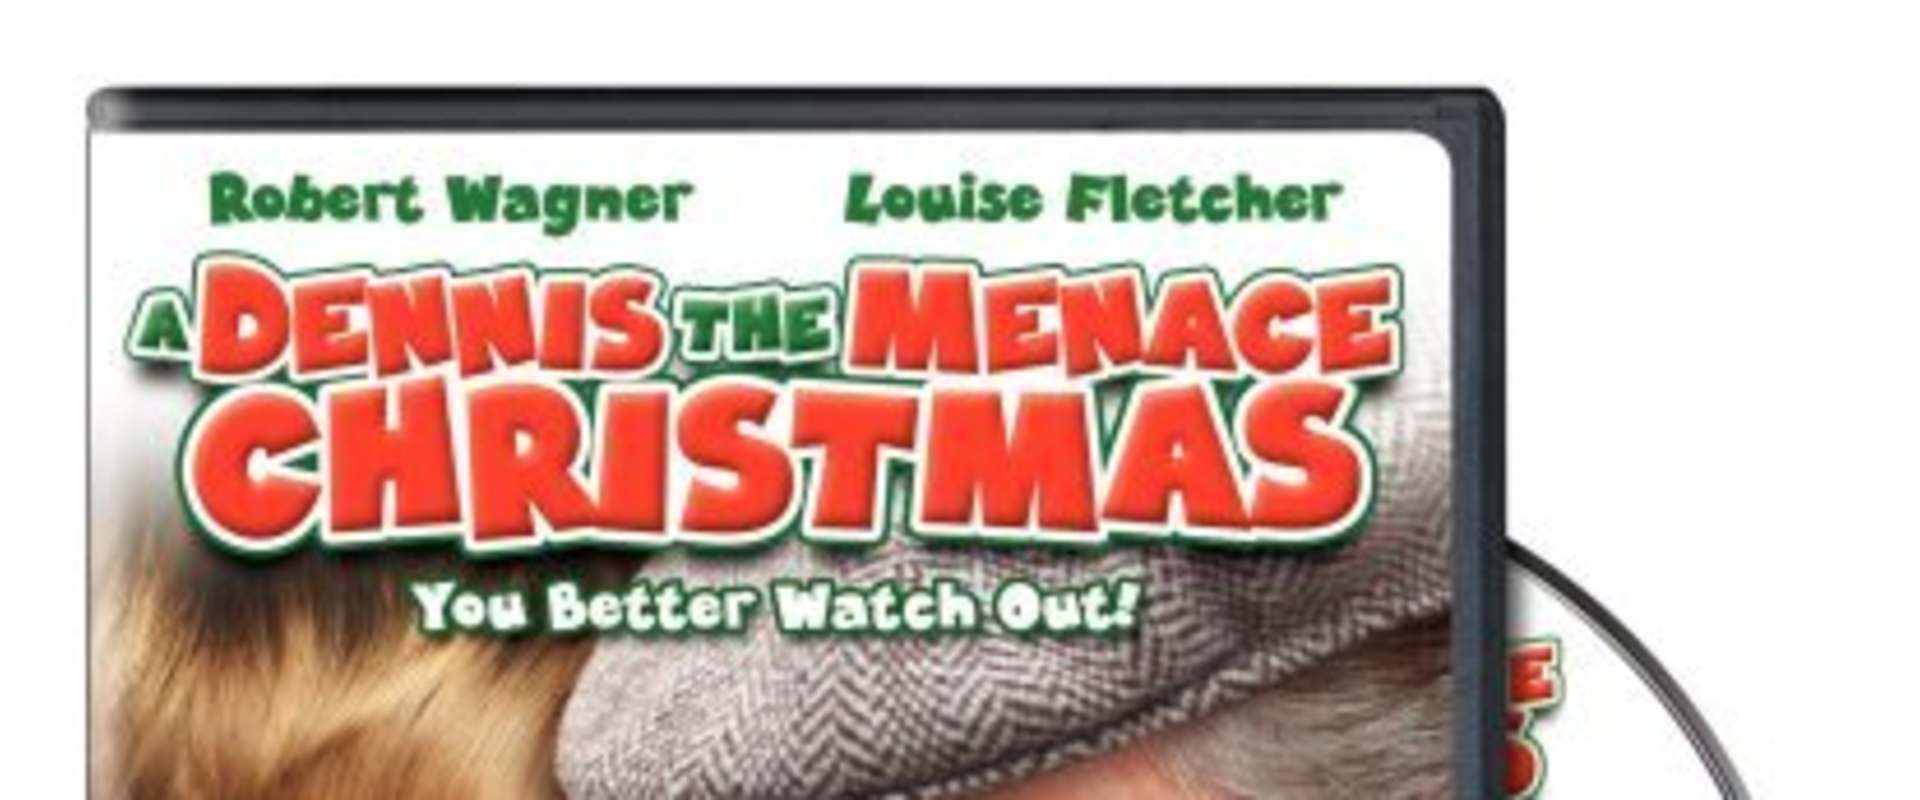 A Dennis the Menace Christmas background 2